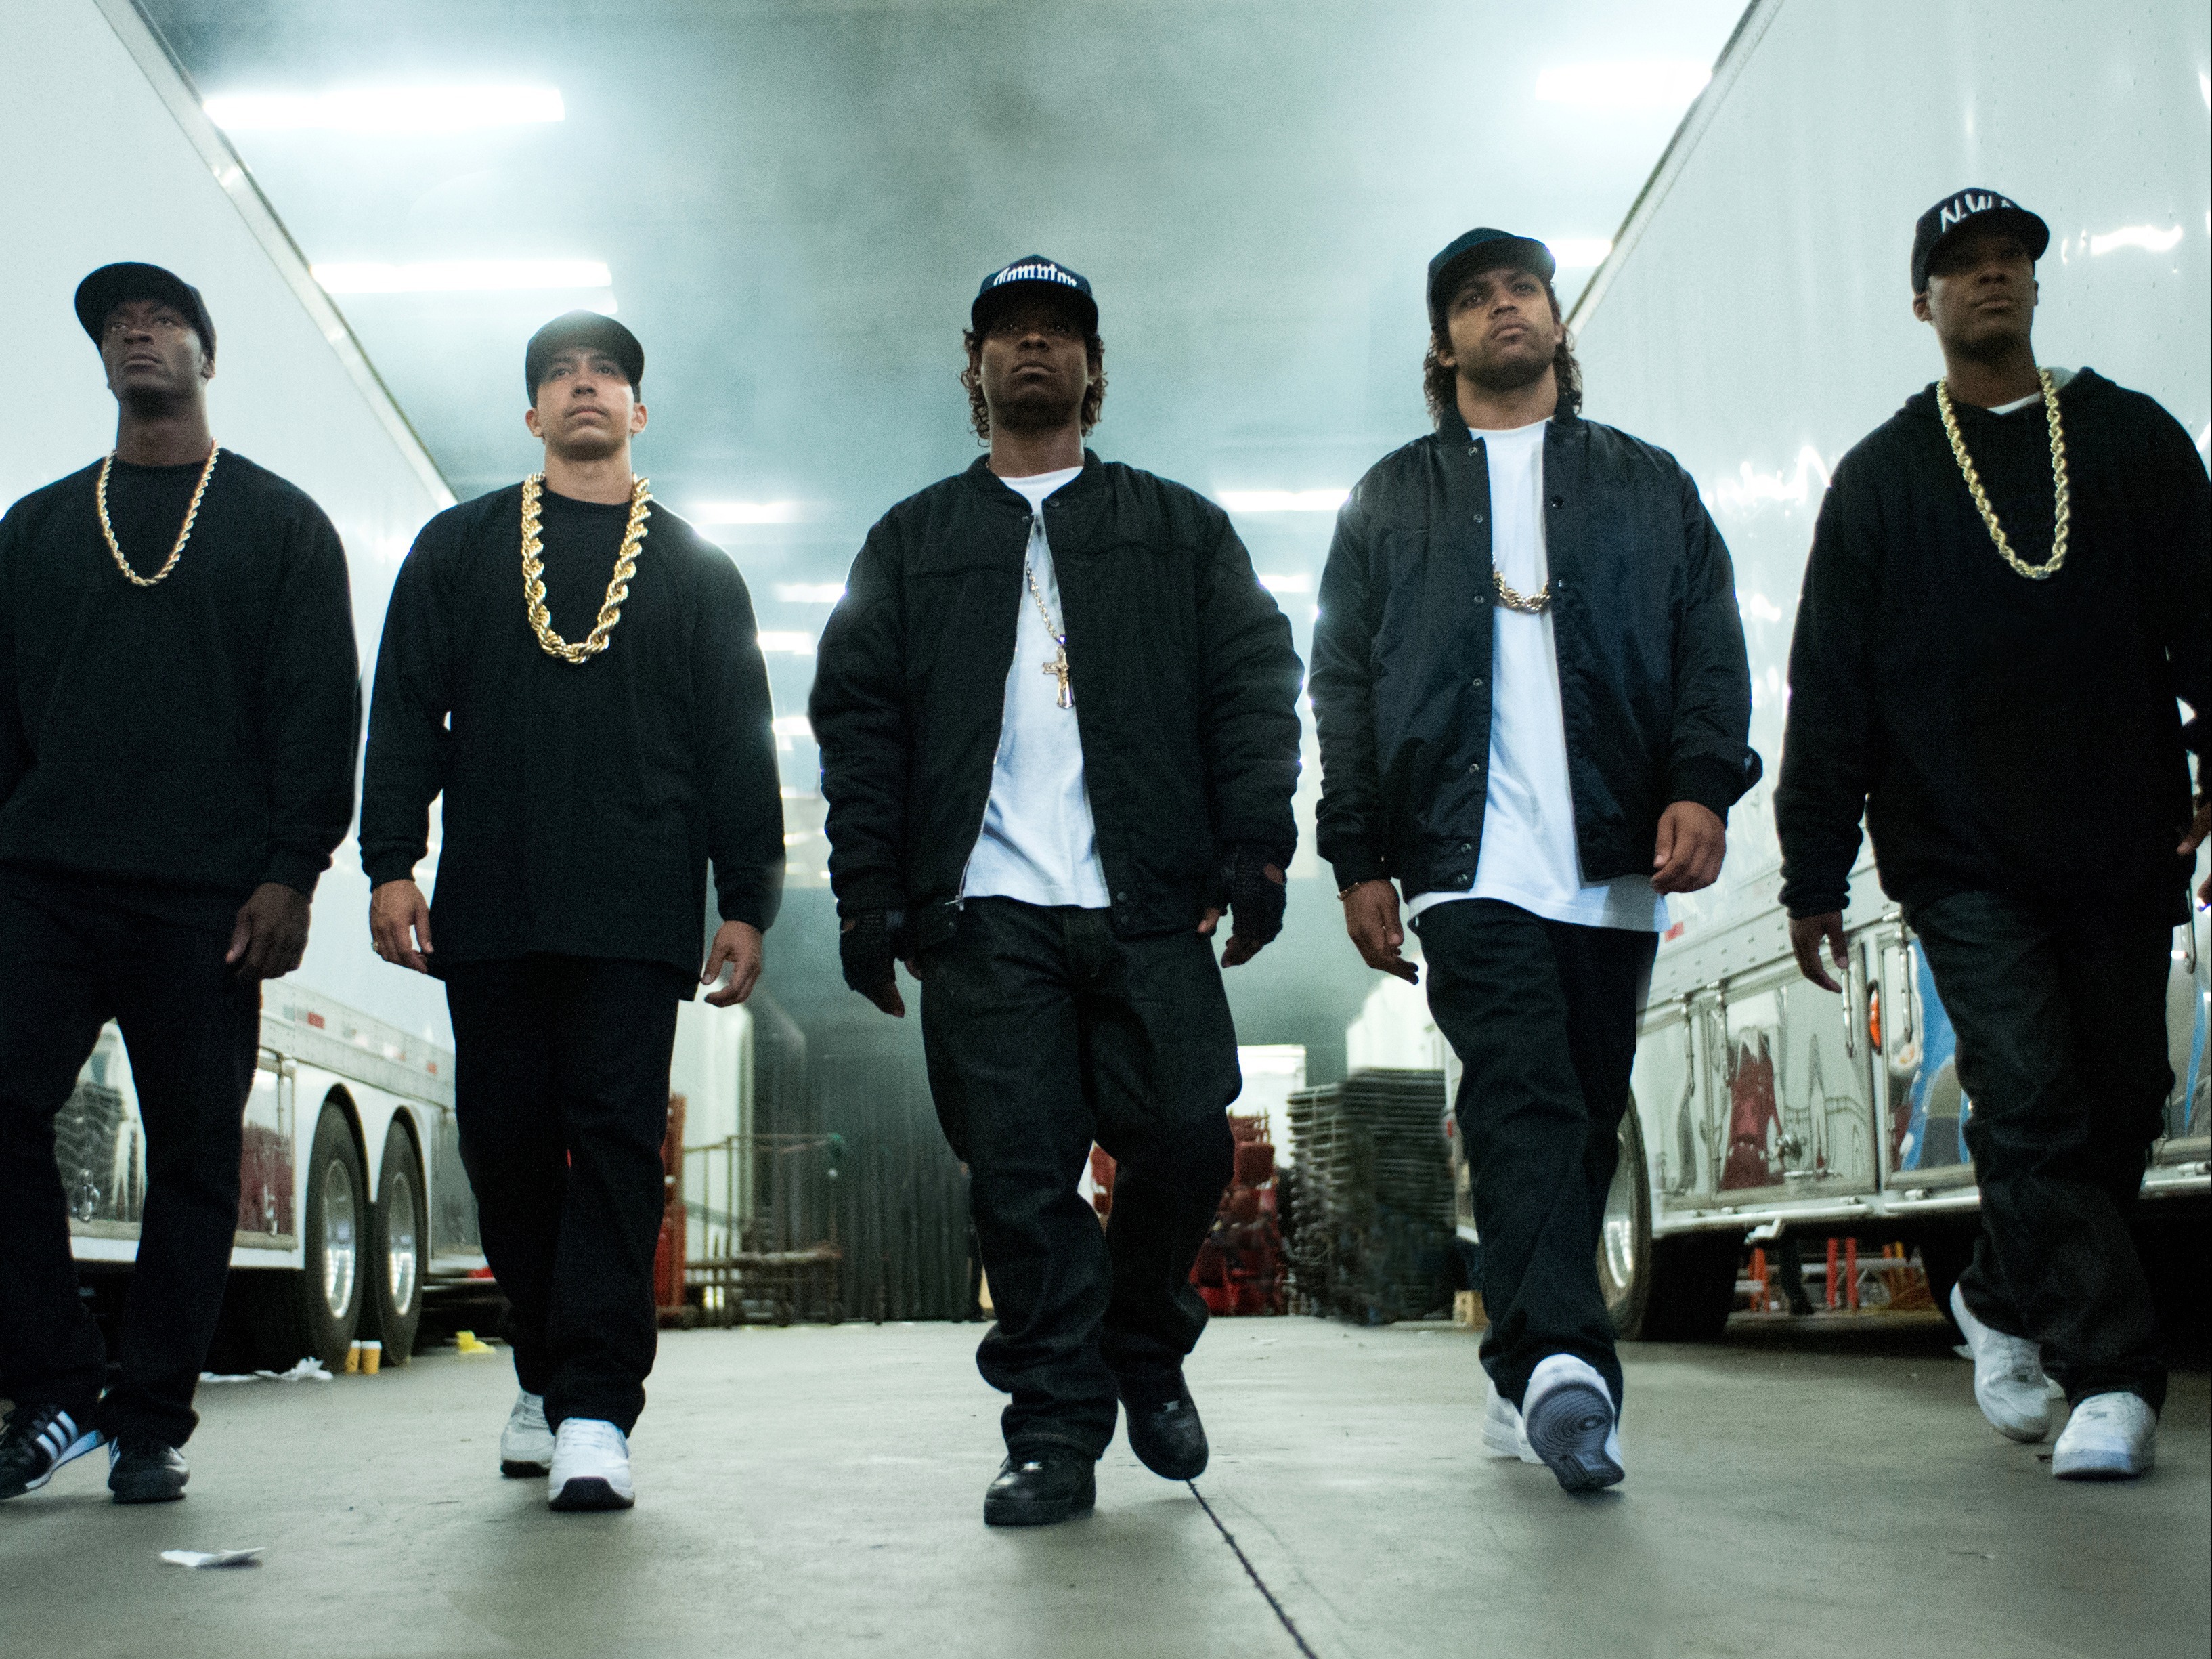 heres-the-straight-outta-compton-casting-call-that-everybody-thought-was-racist